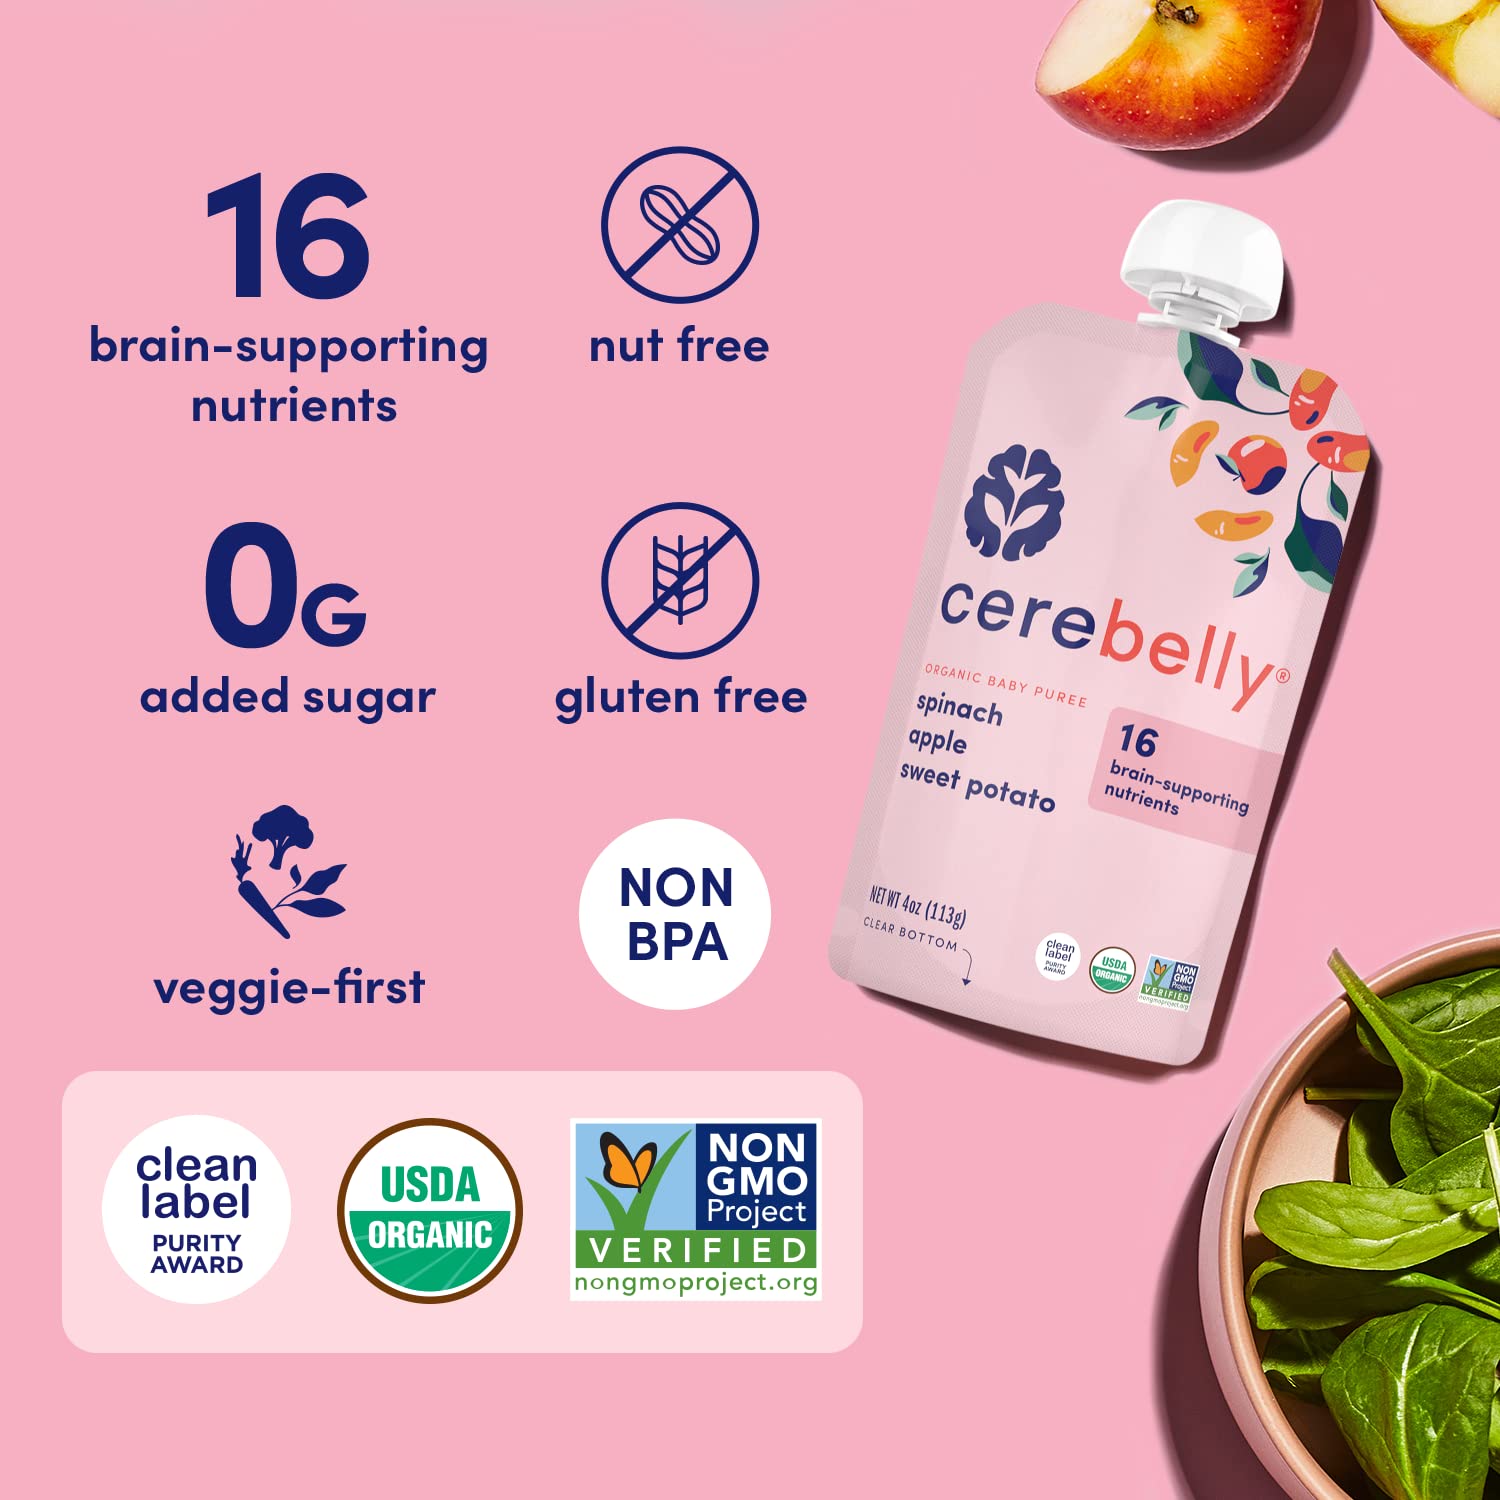 Cerebelly Baby Food Pouches – Organic Spinach Apple Sweet Potato (4 oz, Pack of 6) - Toddler Snacks - 16 Brain-Supporting Nutrients - Healthy Snacks, Made with Gluten-Free Ingredients, No Added Sugar : Baby